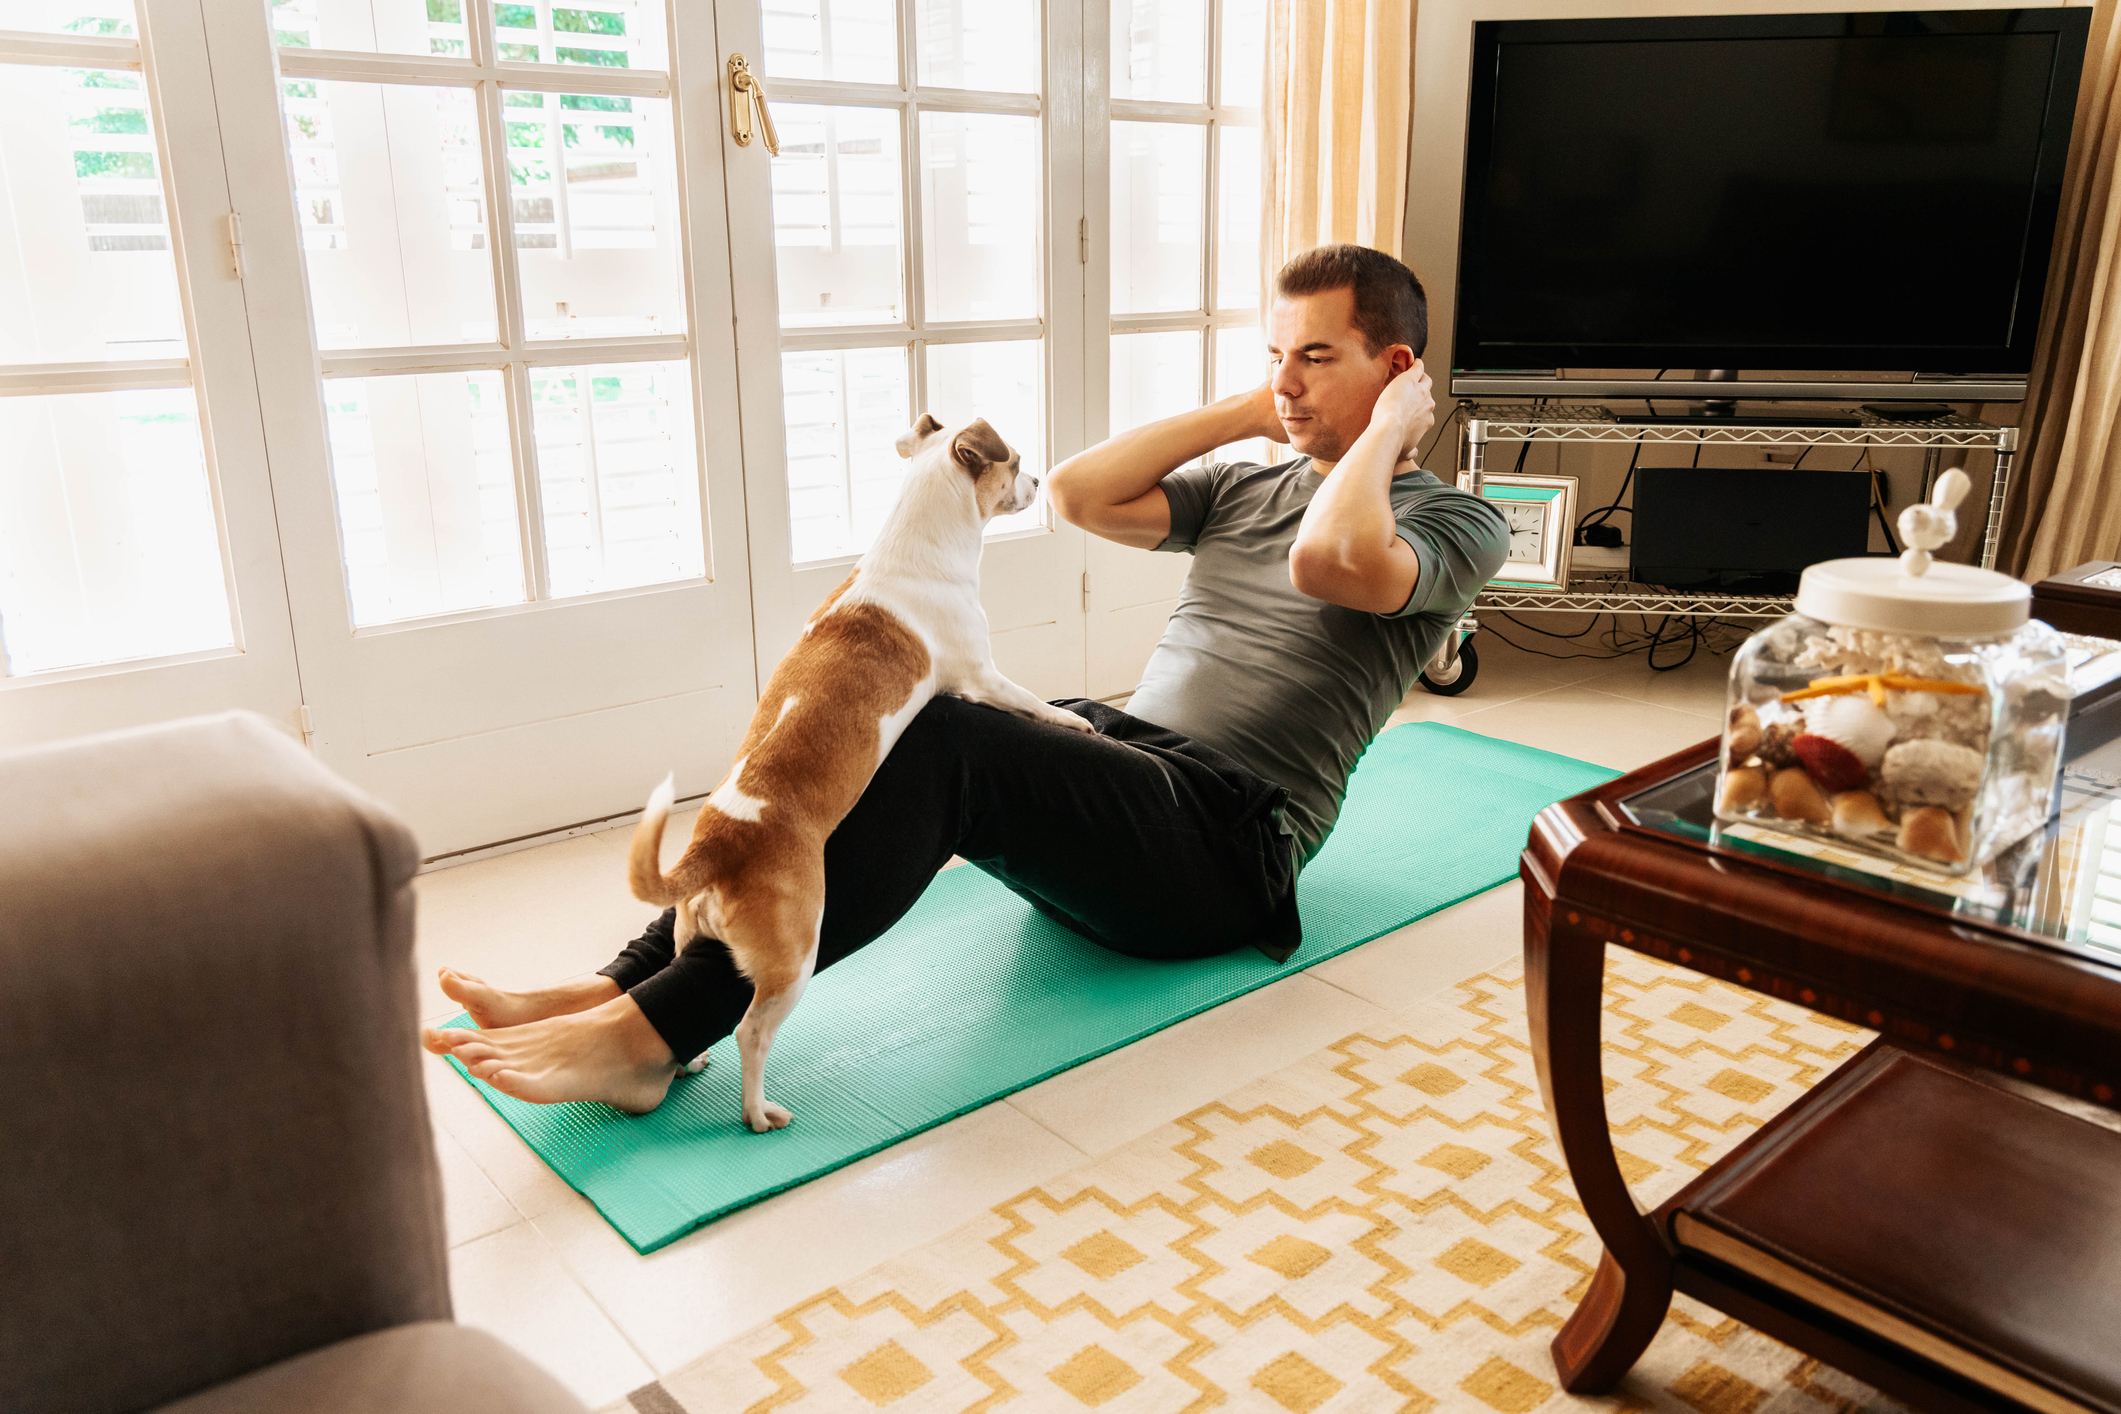 Man doing sit-ups at home with a dog beside him on a yoga mat, promoting fitness with pets